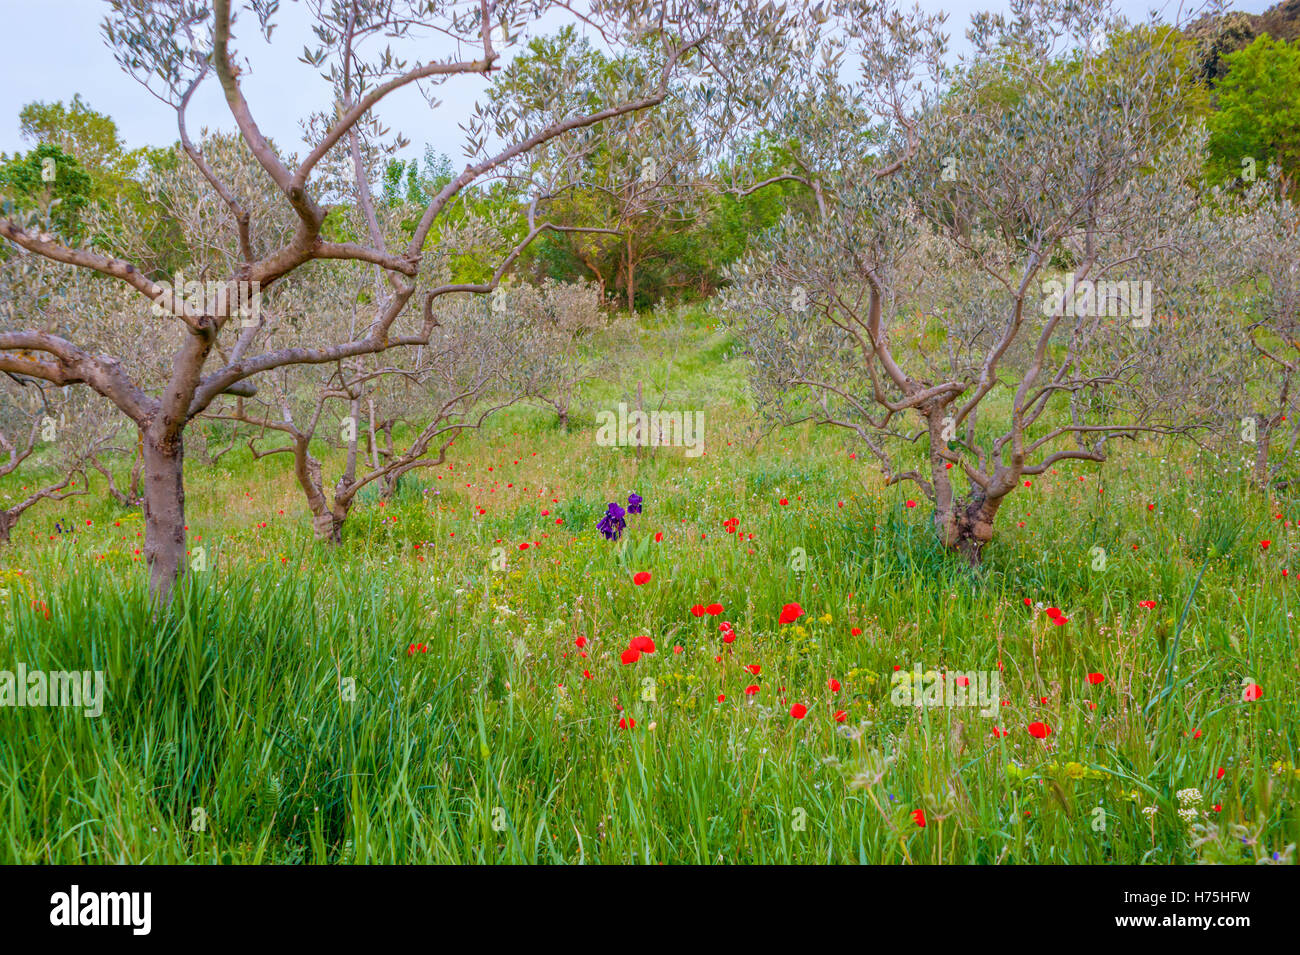 The olive gardens in France with provencal flowers, such as poppies, irises, chamomiles. Stock Photo